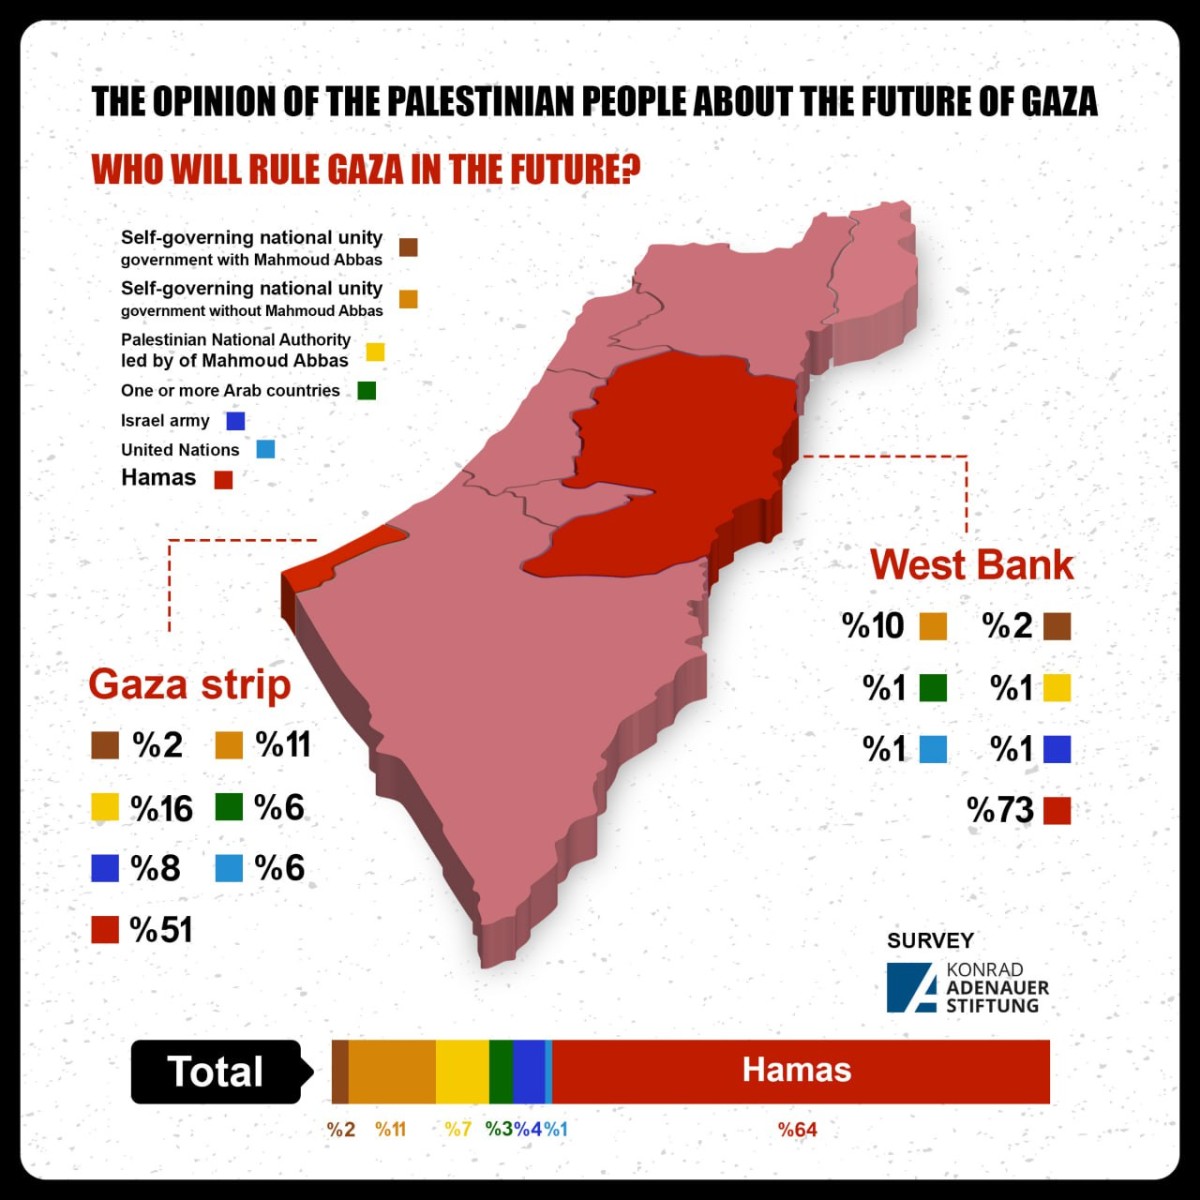 The opinion of the Palestinian people about the future of Gaza